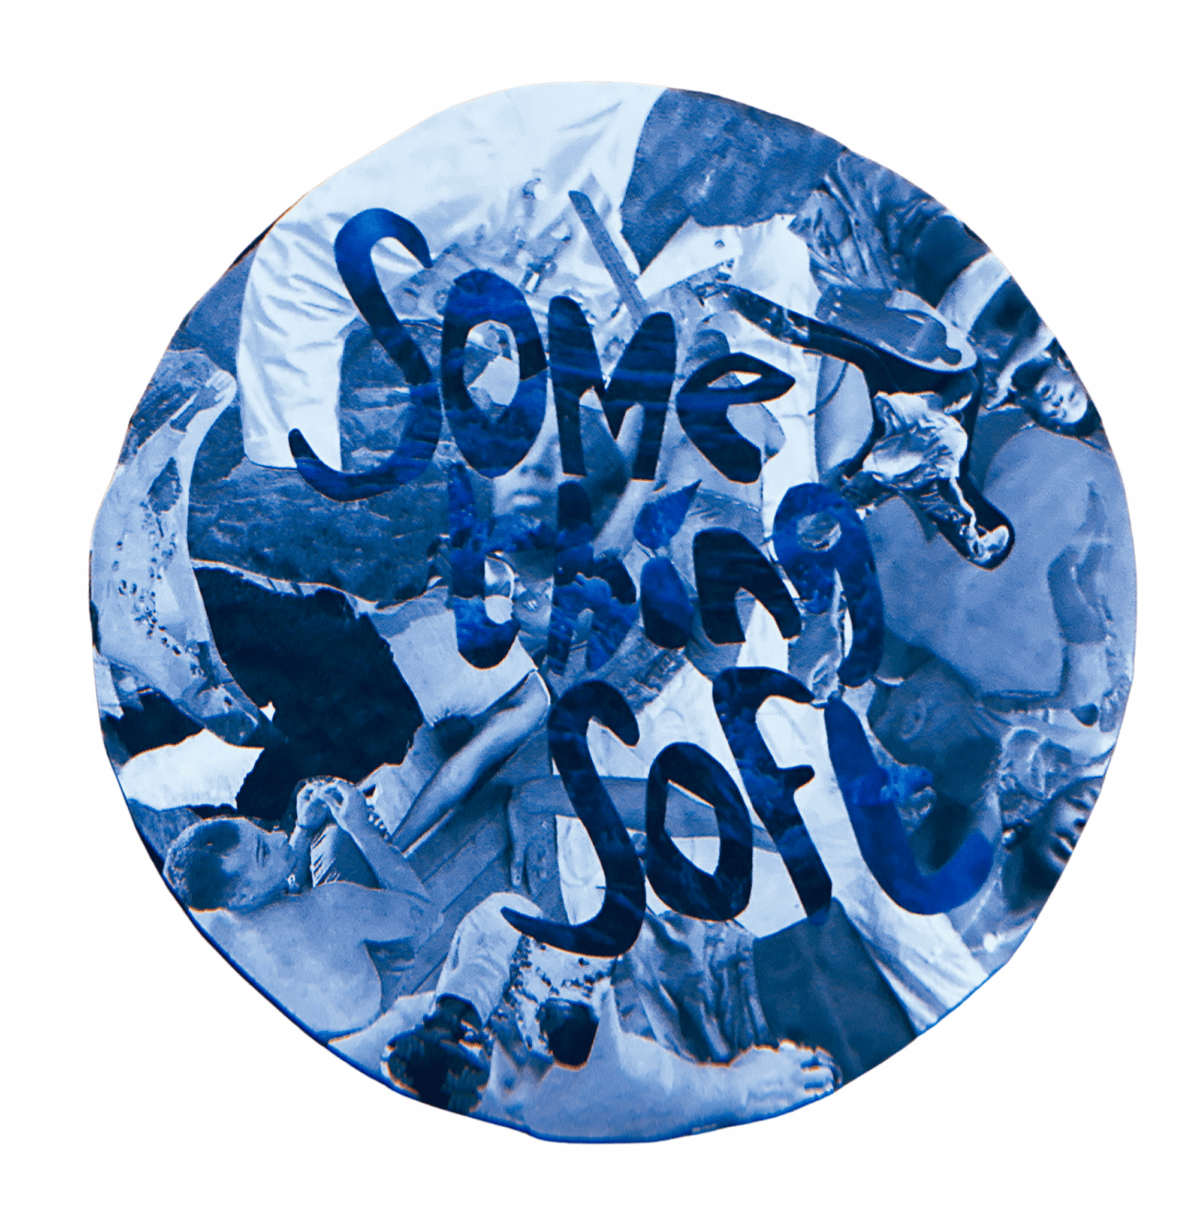 Painted Bride presents "something soft,” Collage by Mawu Gora